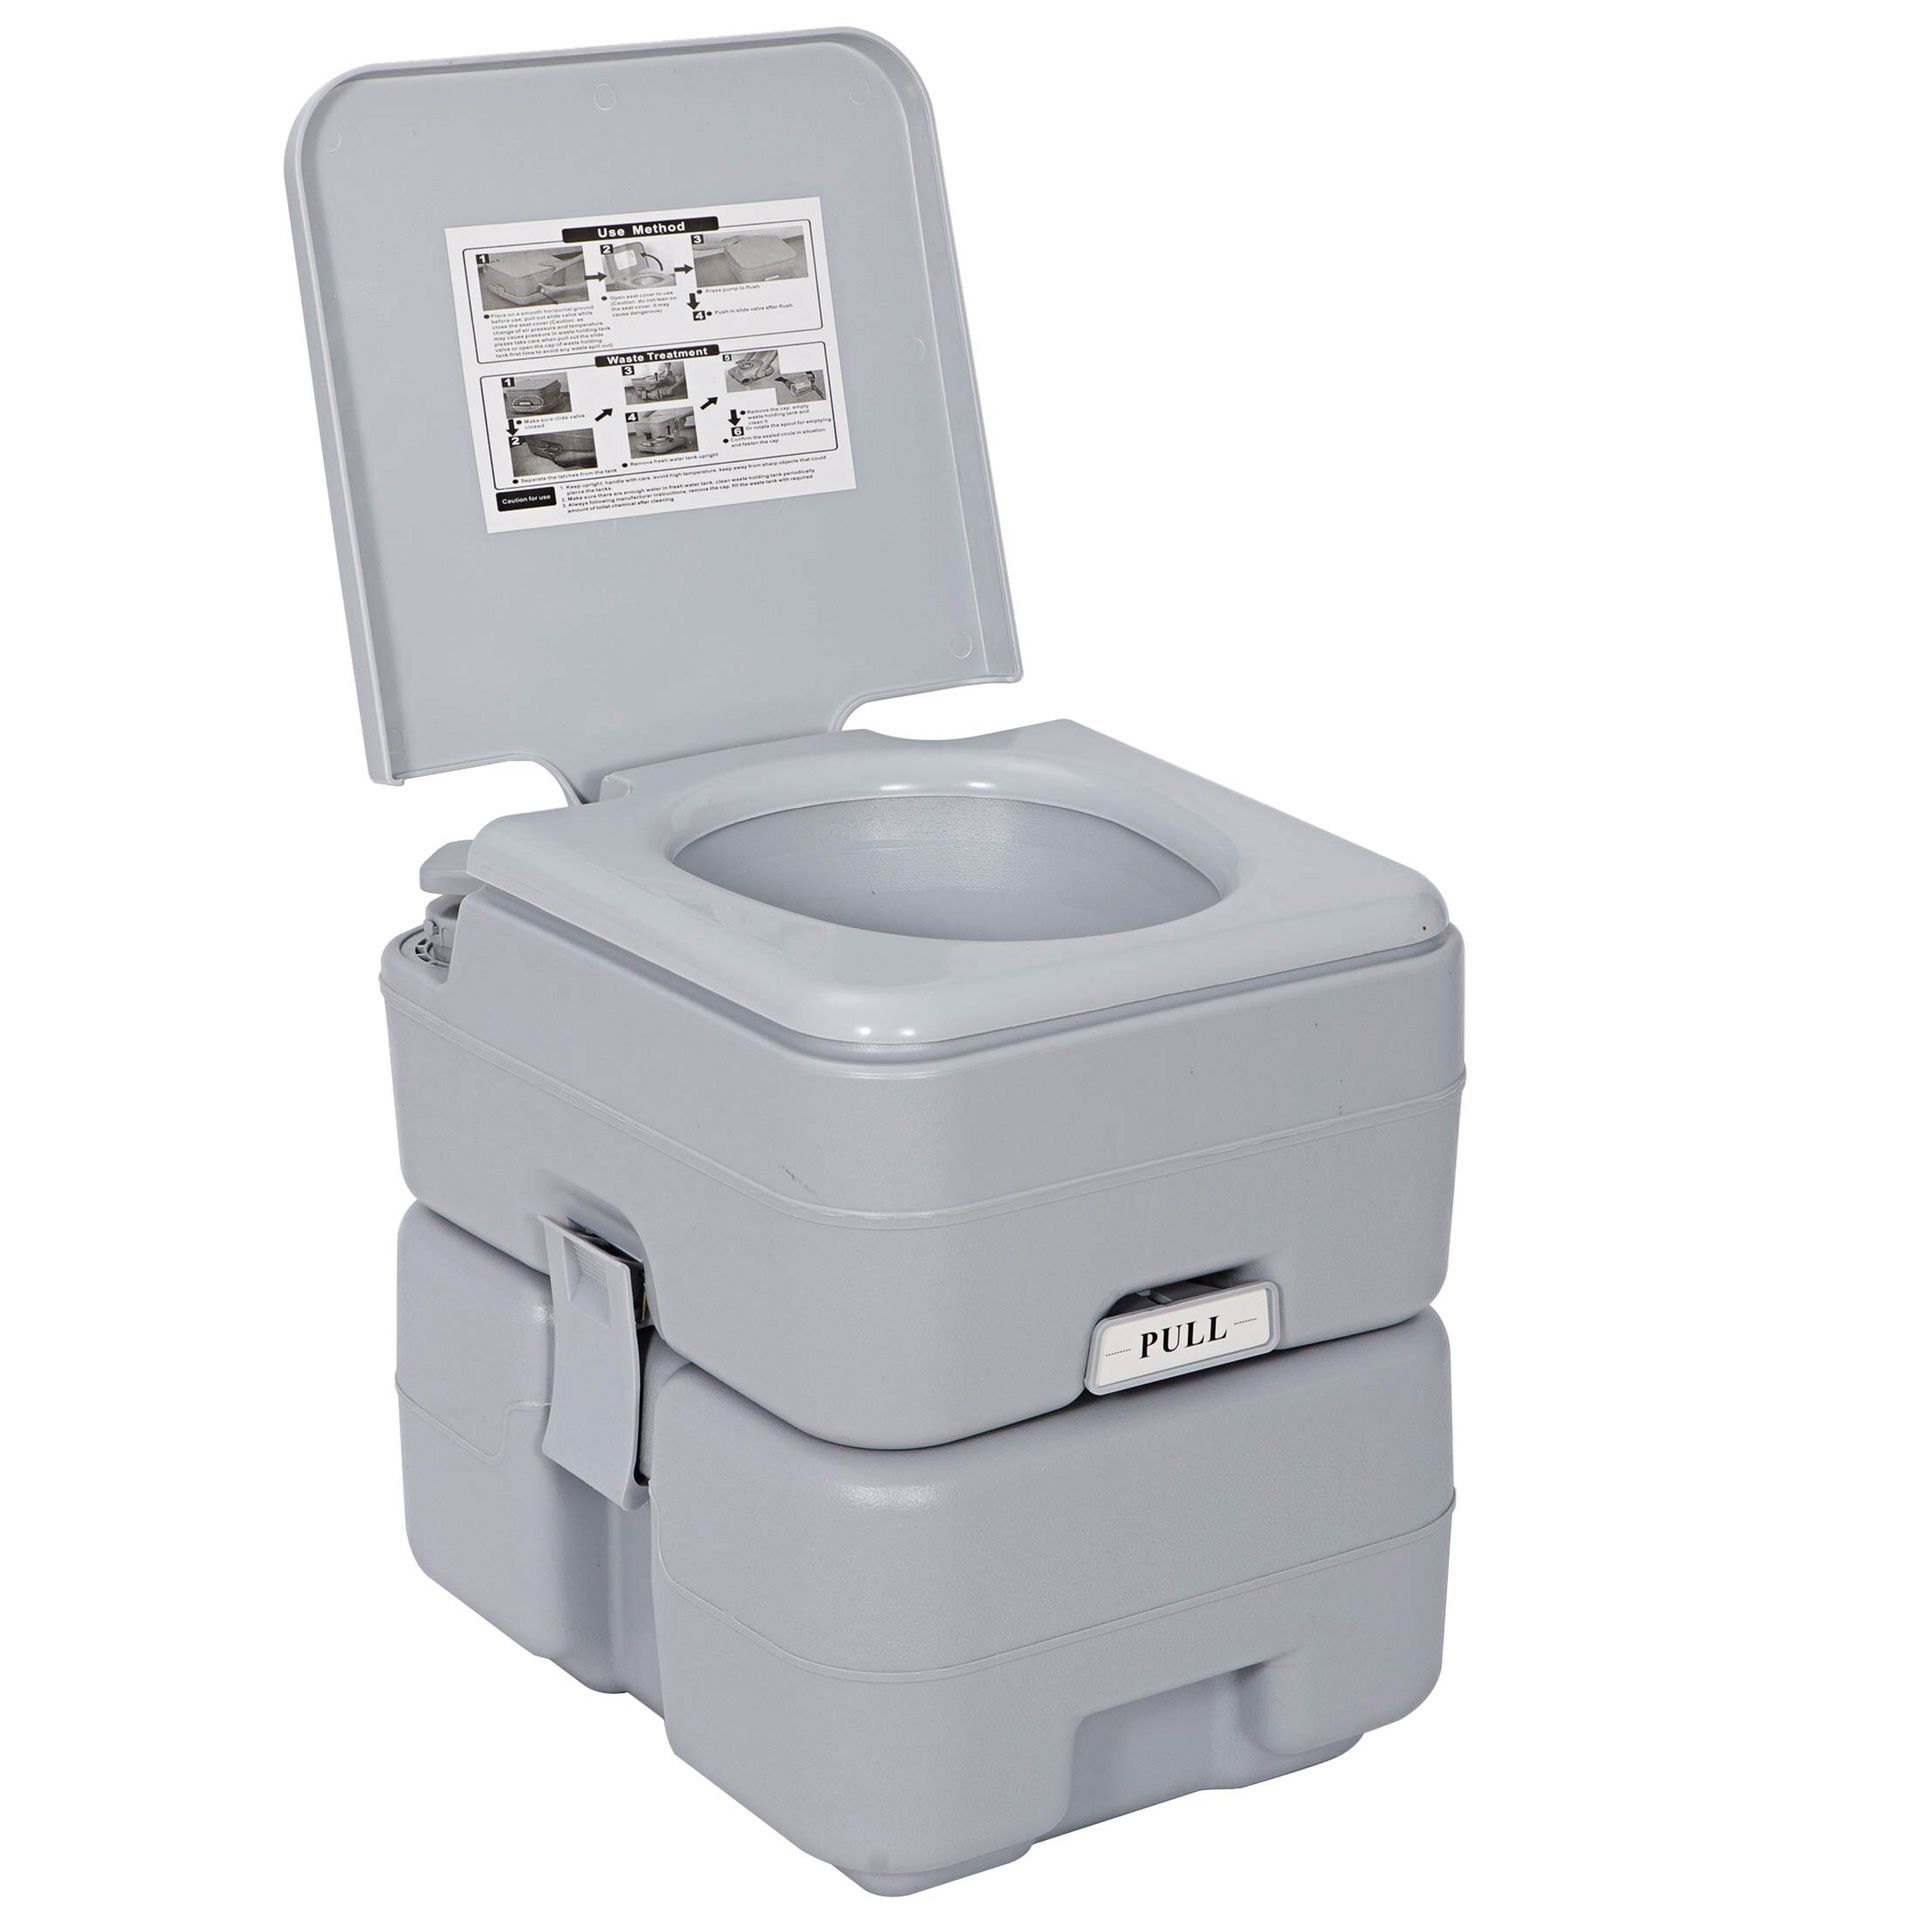 Portable Travel Toilet - Designed for Camping, RV, Boating, Campsite, Hospital and Trips -6.6 Gallon